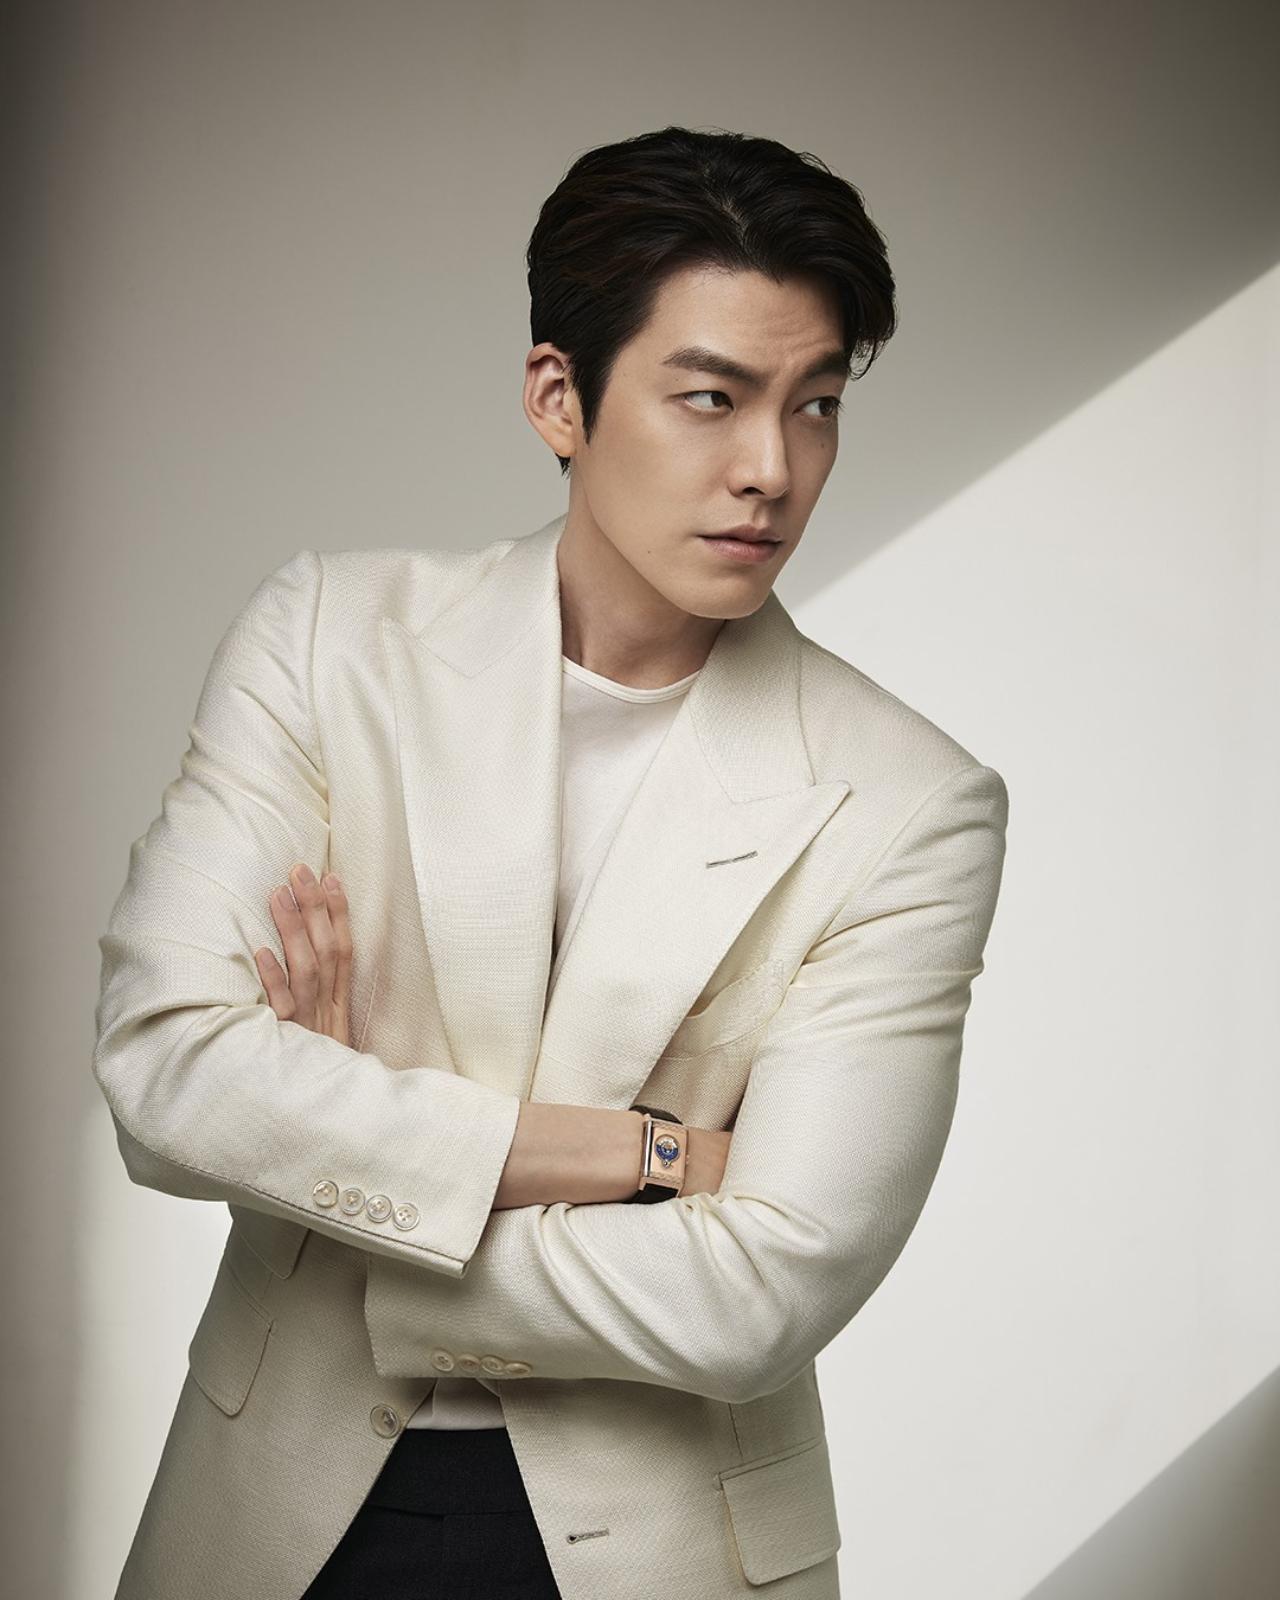 Kim Woo-Bin for Jaeger-LeCoultre
Kim Woo-Bin joined Jaeger-LeCoultre in June 2021 as its new brand ambassador, after his recovery from nasopharyngeal cancer. His first engagement with the brand at a public forum was during The Sound Marker exhibition in Seoul